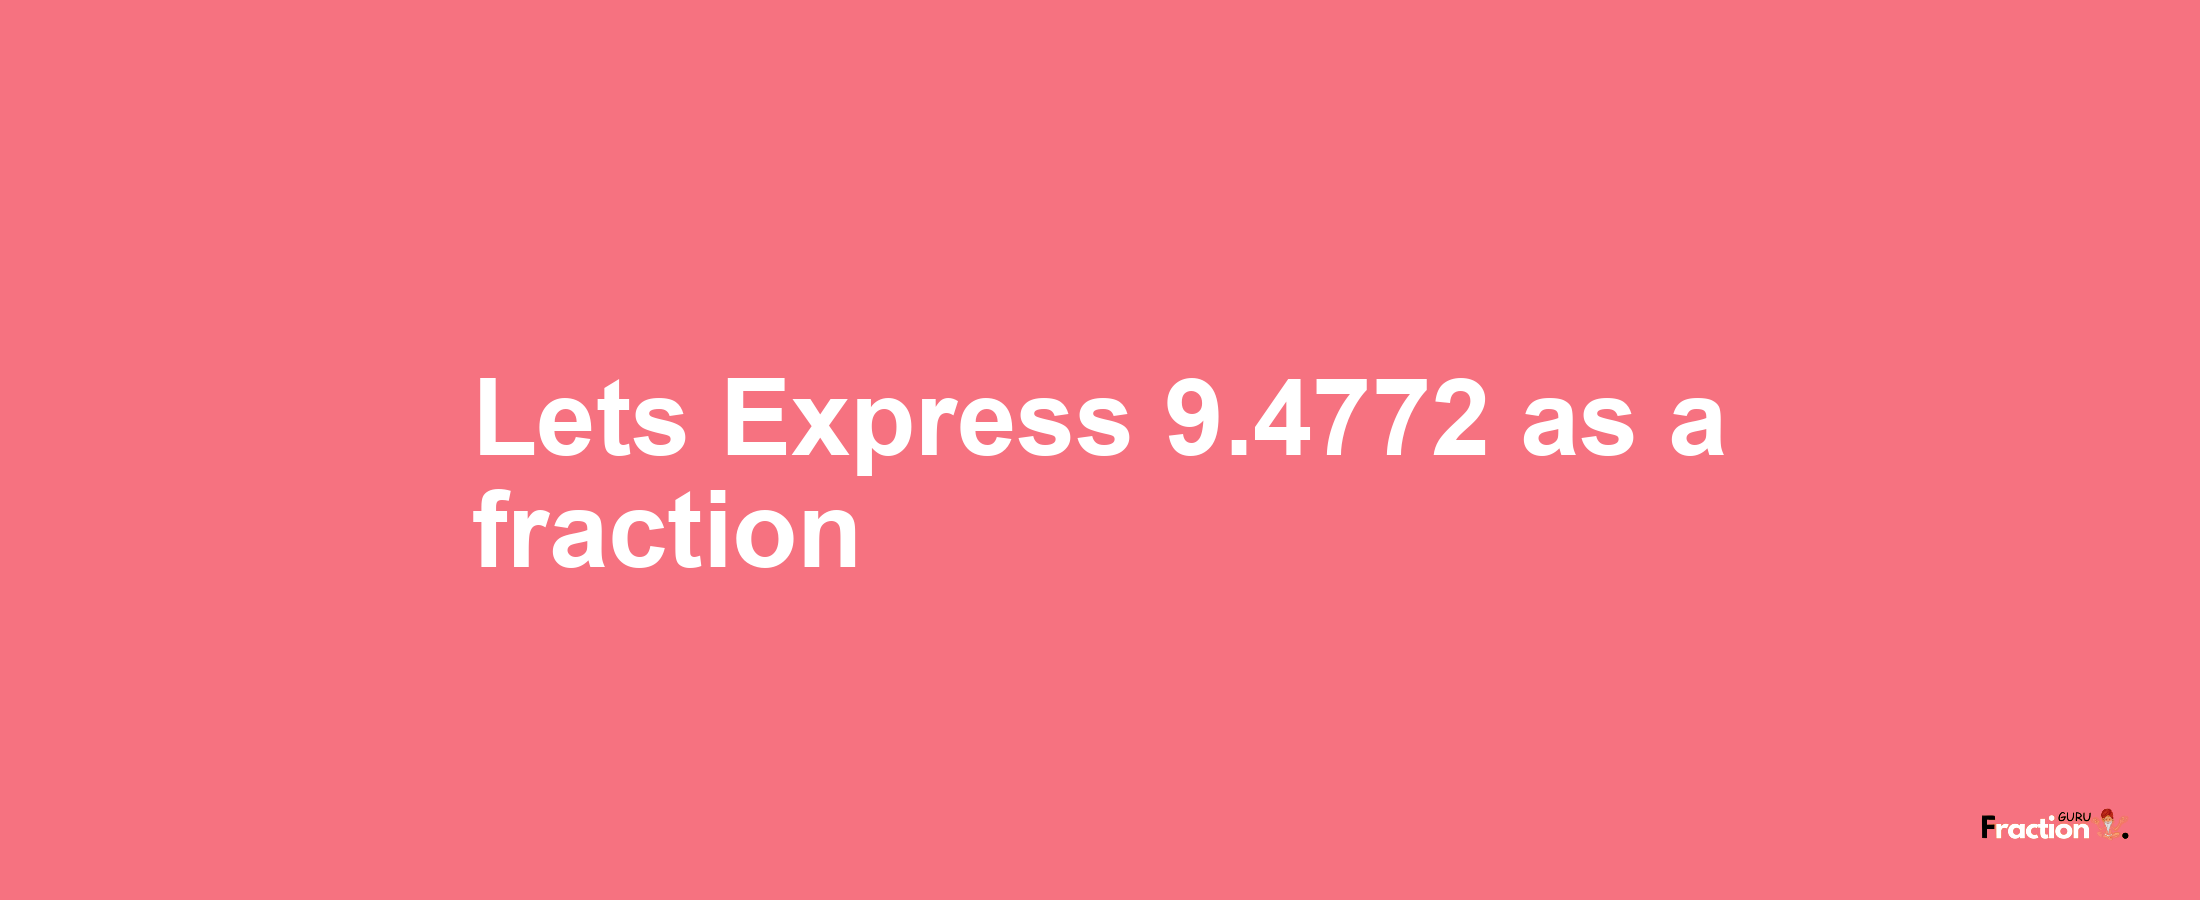 Lets Express 9.4772 as afraction